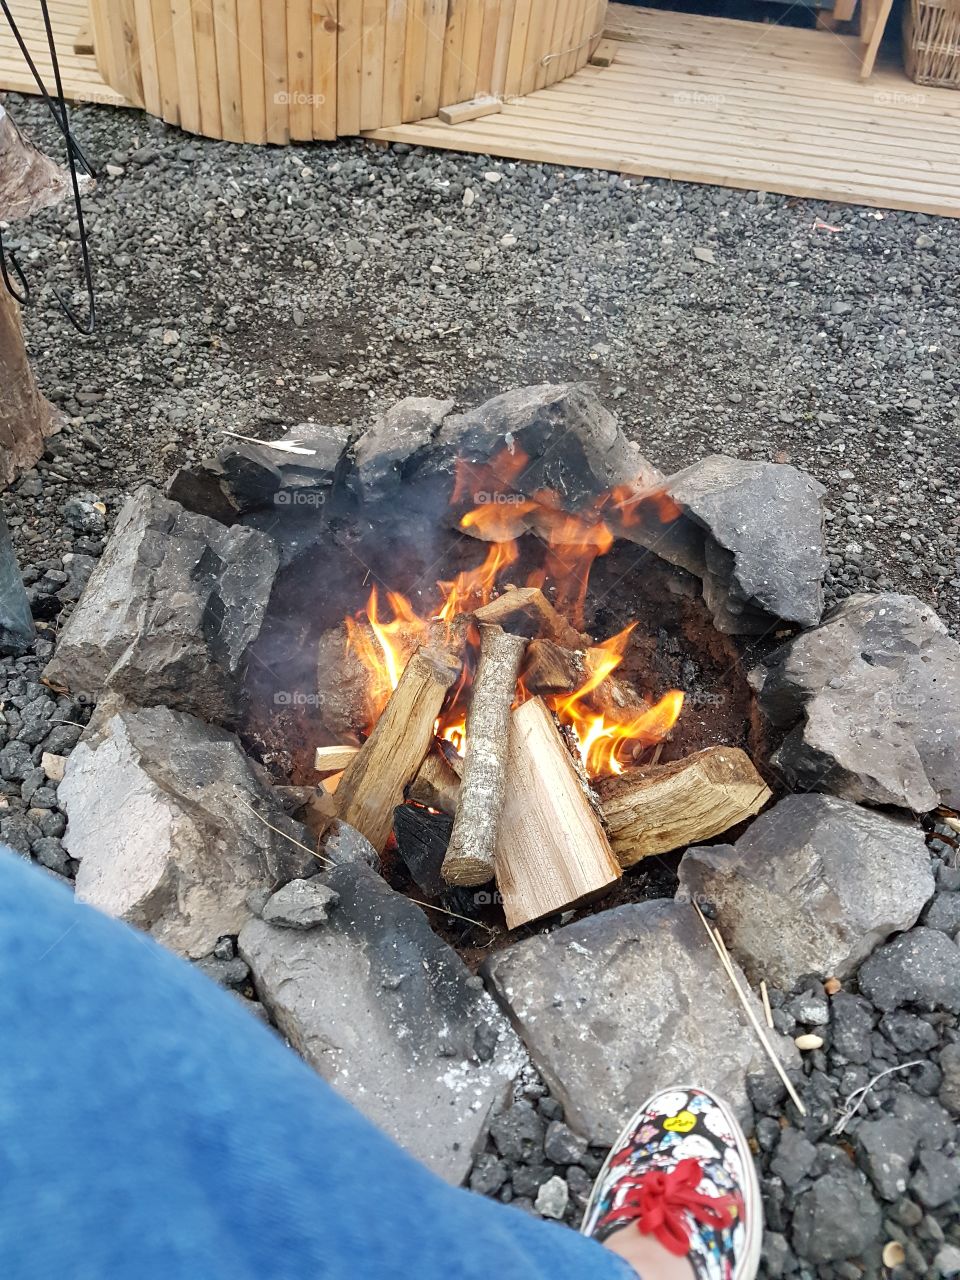 A campfire with wooden logs